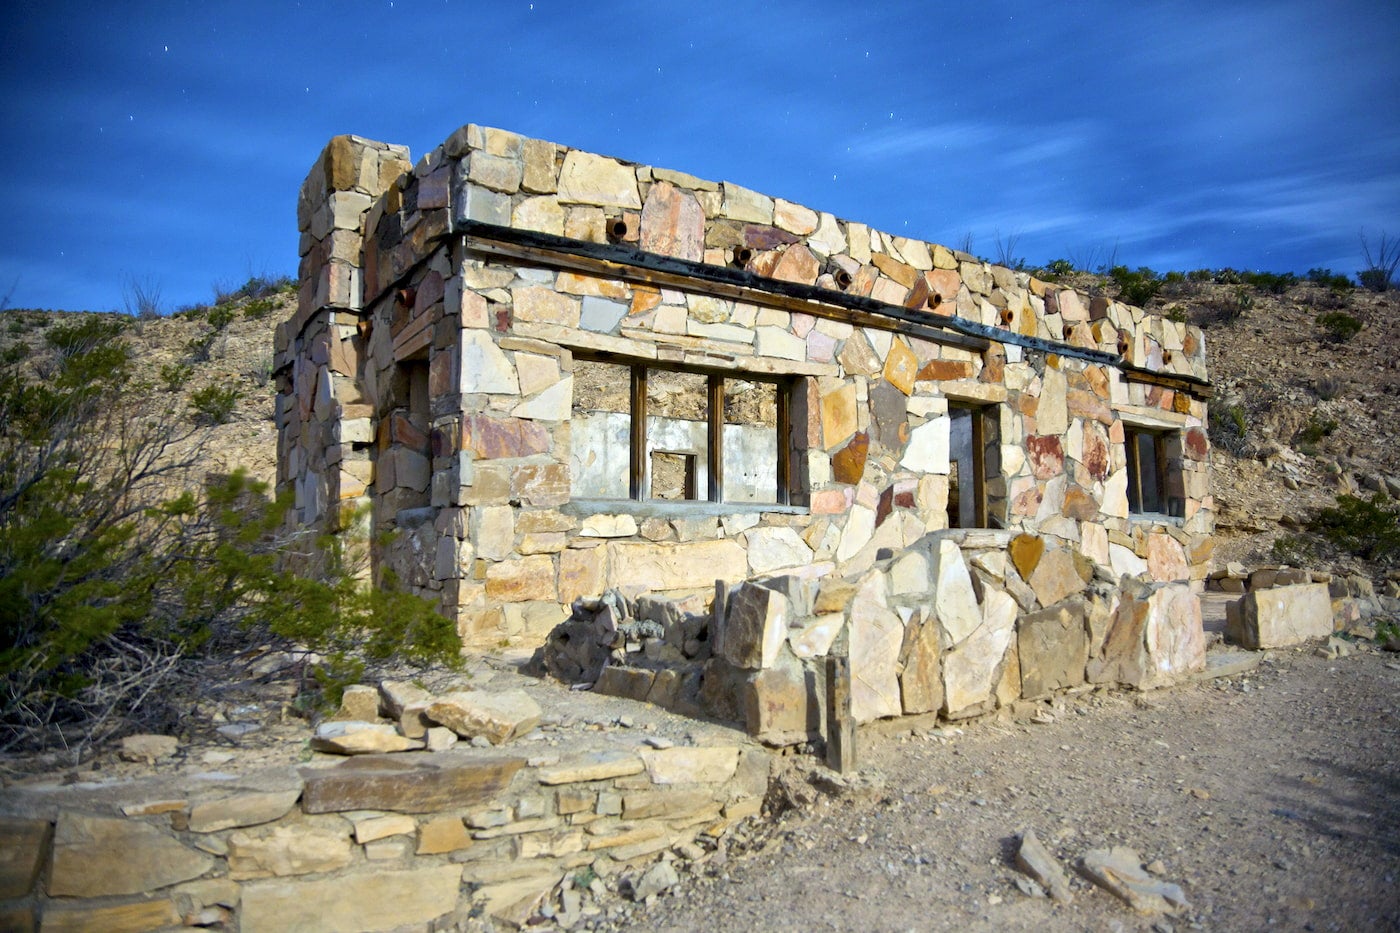 Stone building in the desert with hollow windows.